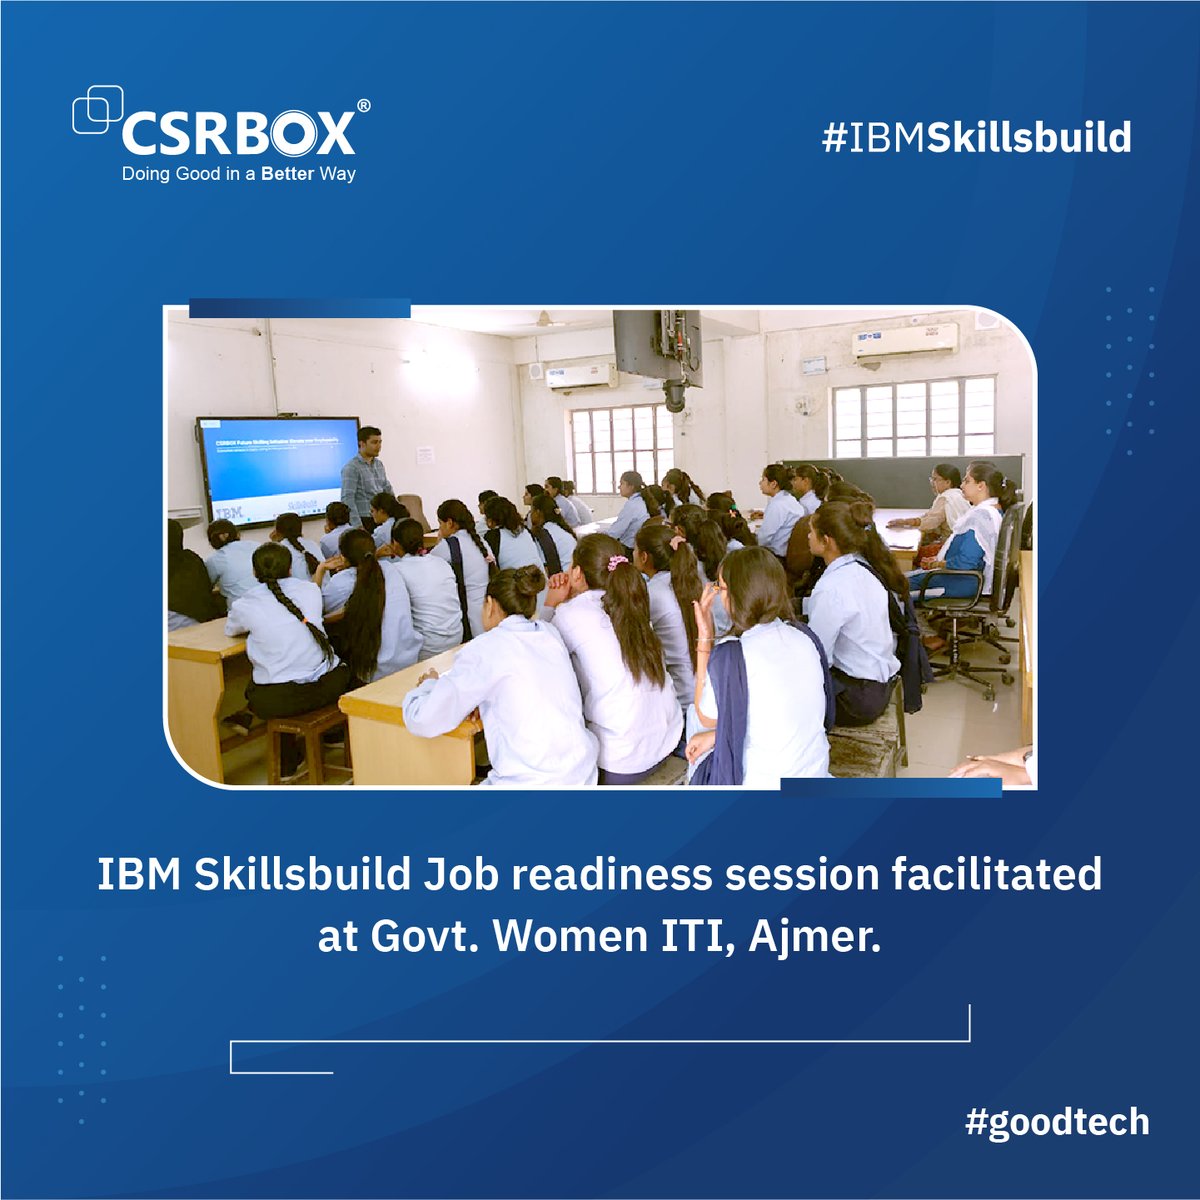 Hosted a master class at Govt Women ITI Ajmer as part of IBM SkillsBuild initiative.  ITI's dedication to empowering students is commendable. Over 120+ learners attended, gaining valuable insights into resumes, job outreach, interview questions, and the IBM SkillsBuild platform.